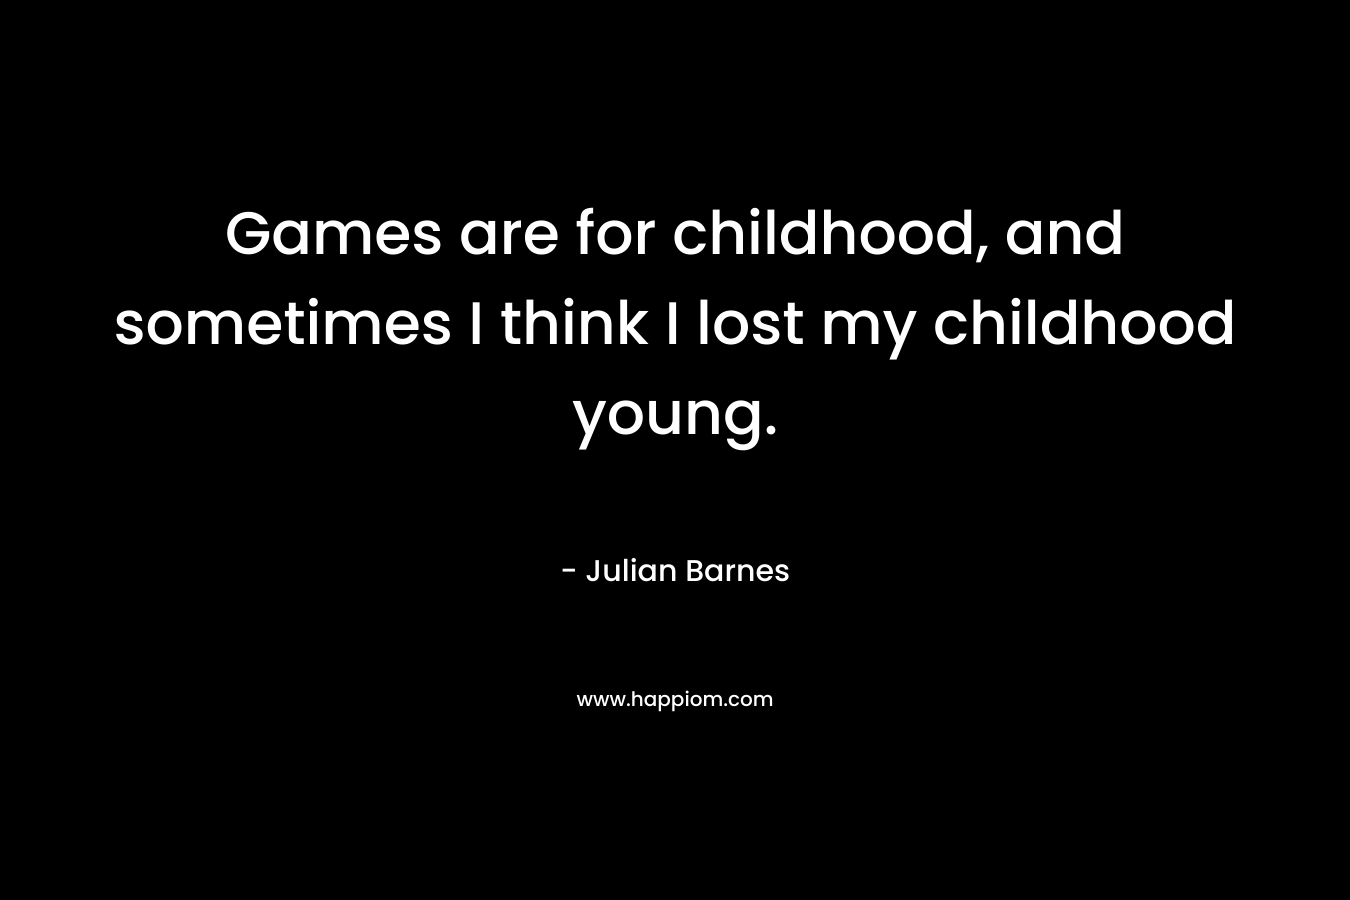 Games are for childhood, and sometimes I think I lost my childhood young. – Julian Barnes